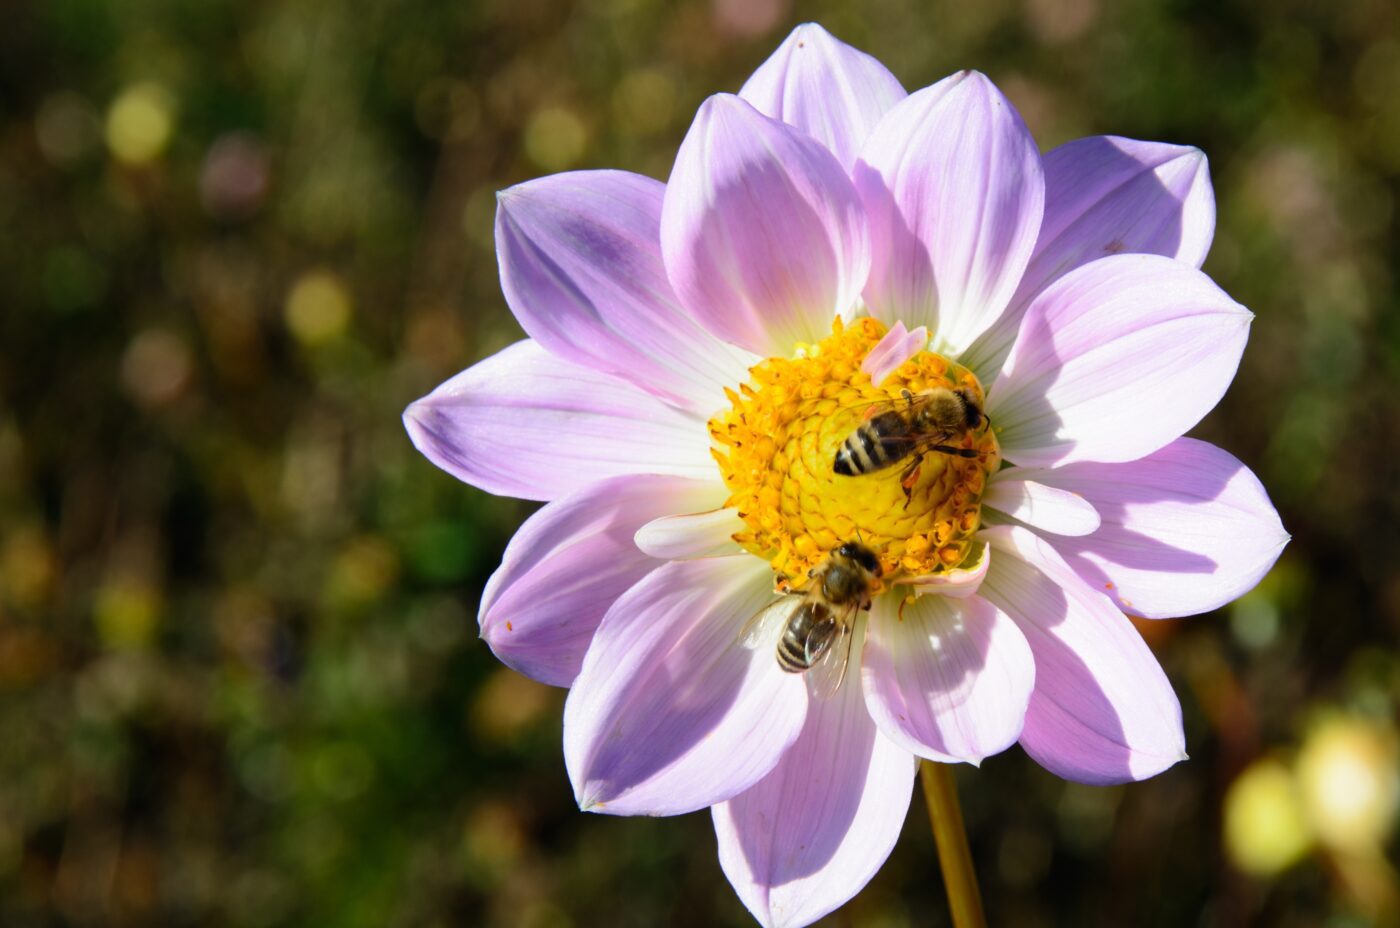 A pair of bees pollinating a flower